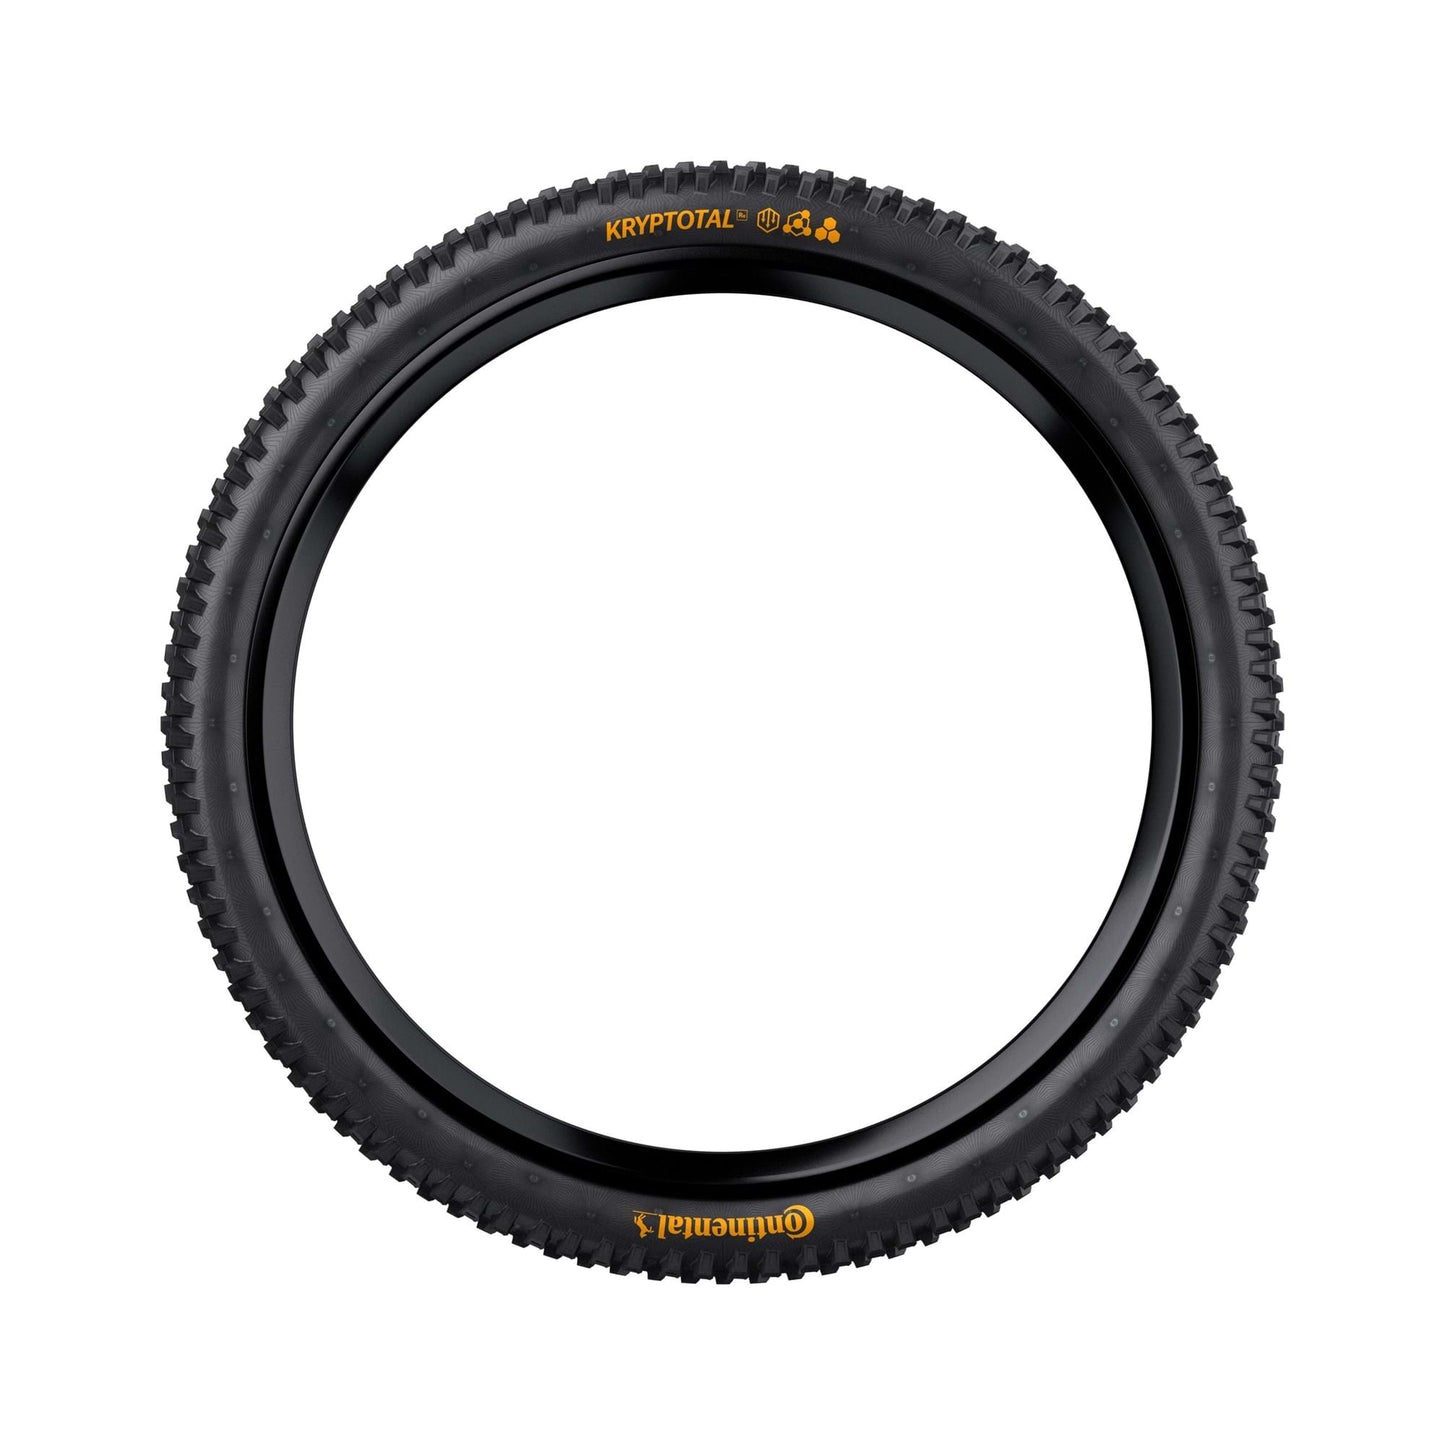 CONTINENTAL KRYPTOTAL-FR DOWNHILL 27.5X2.40" SUPERSOFT FOLDING TYRE